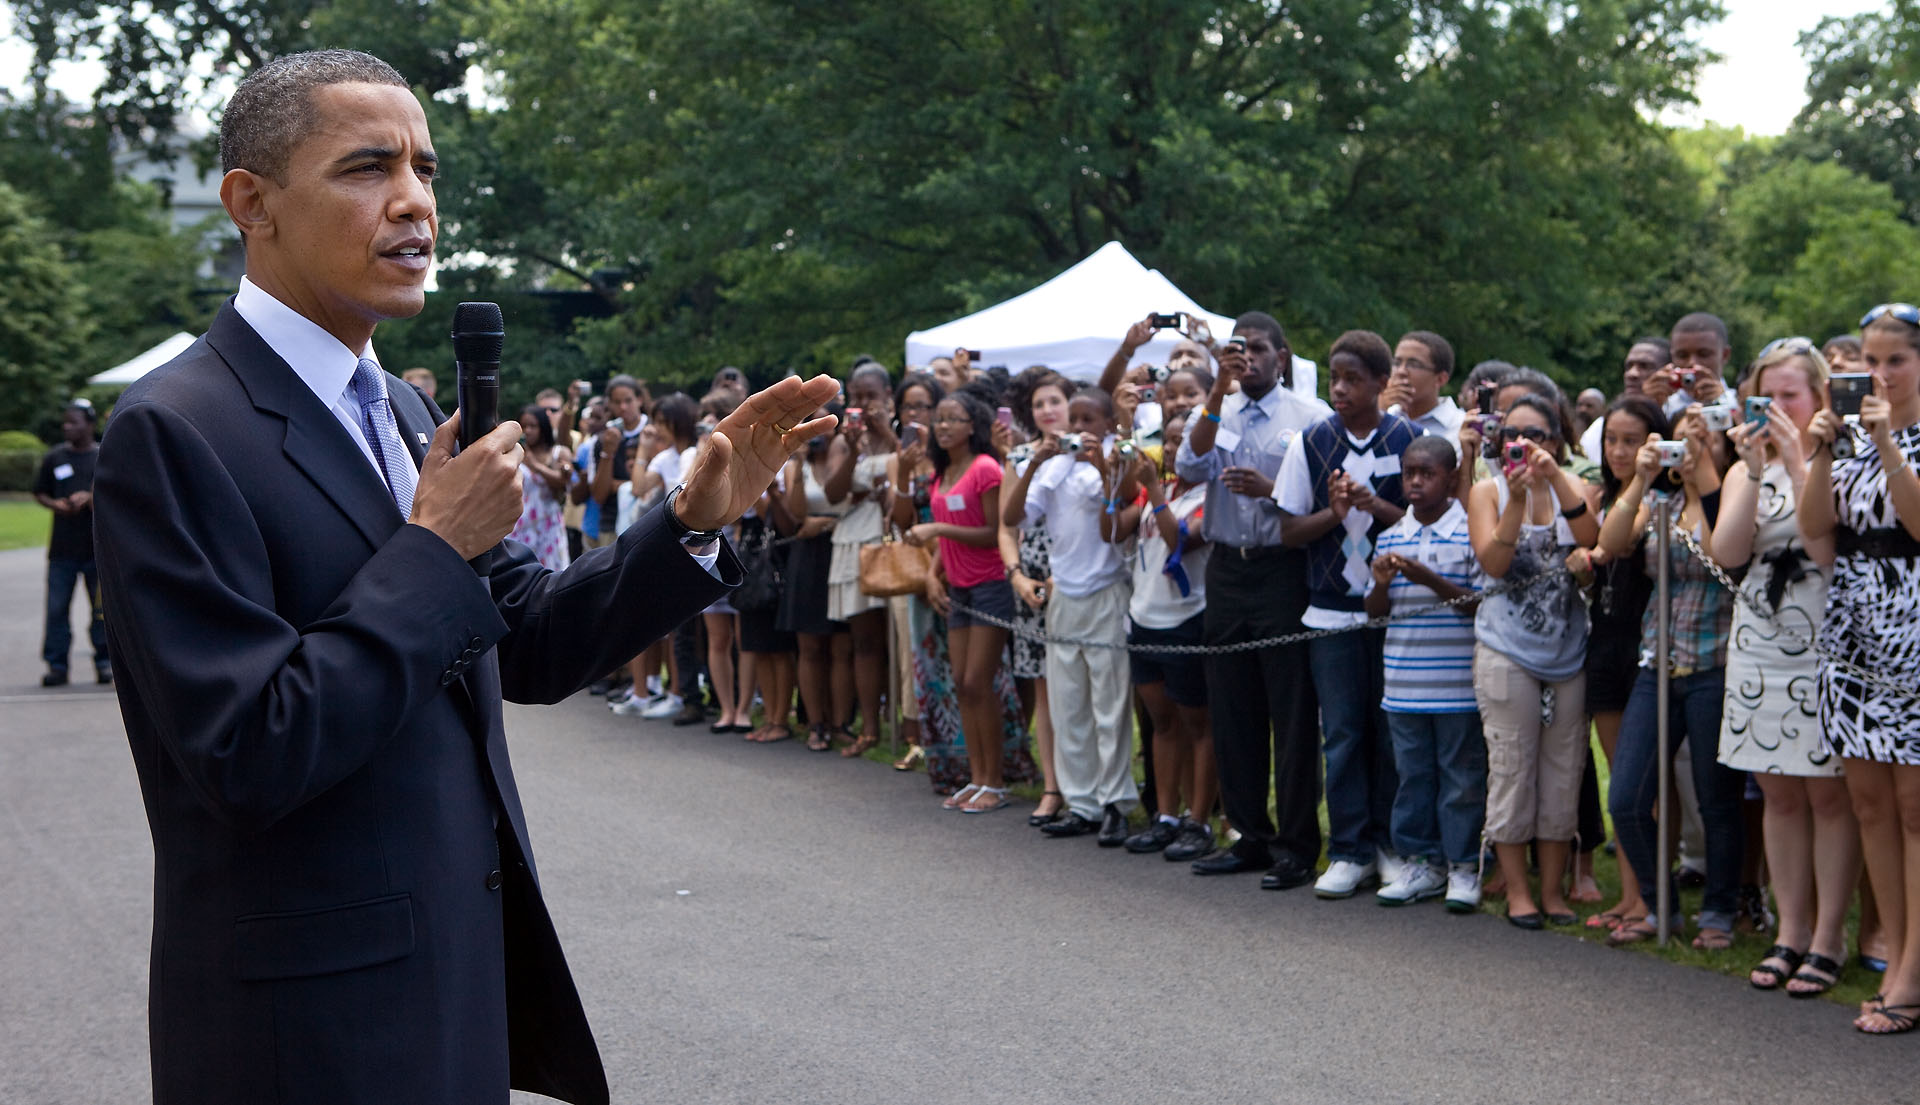 President Obama Speaks at Fatherood Barbecue